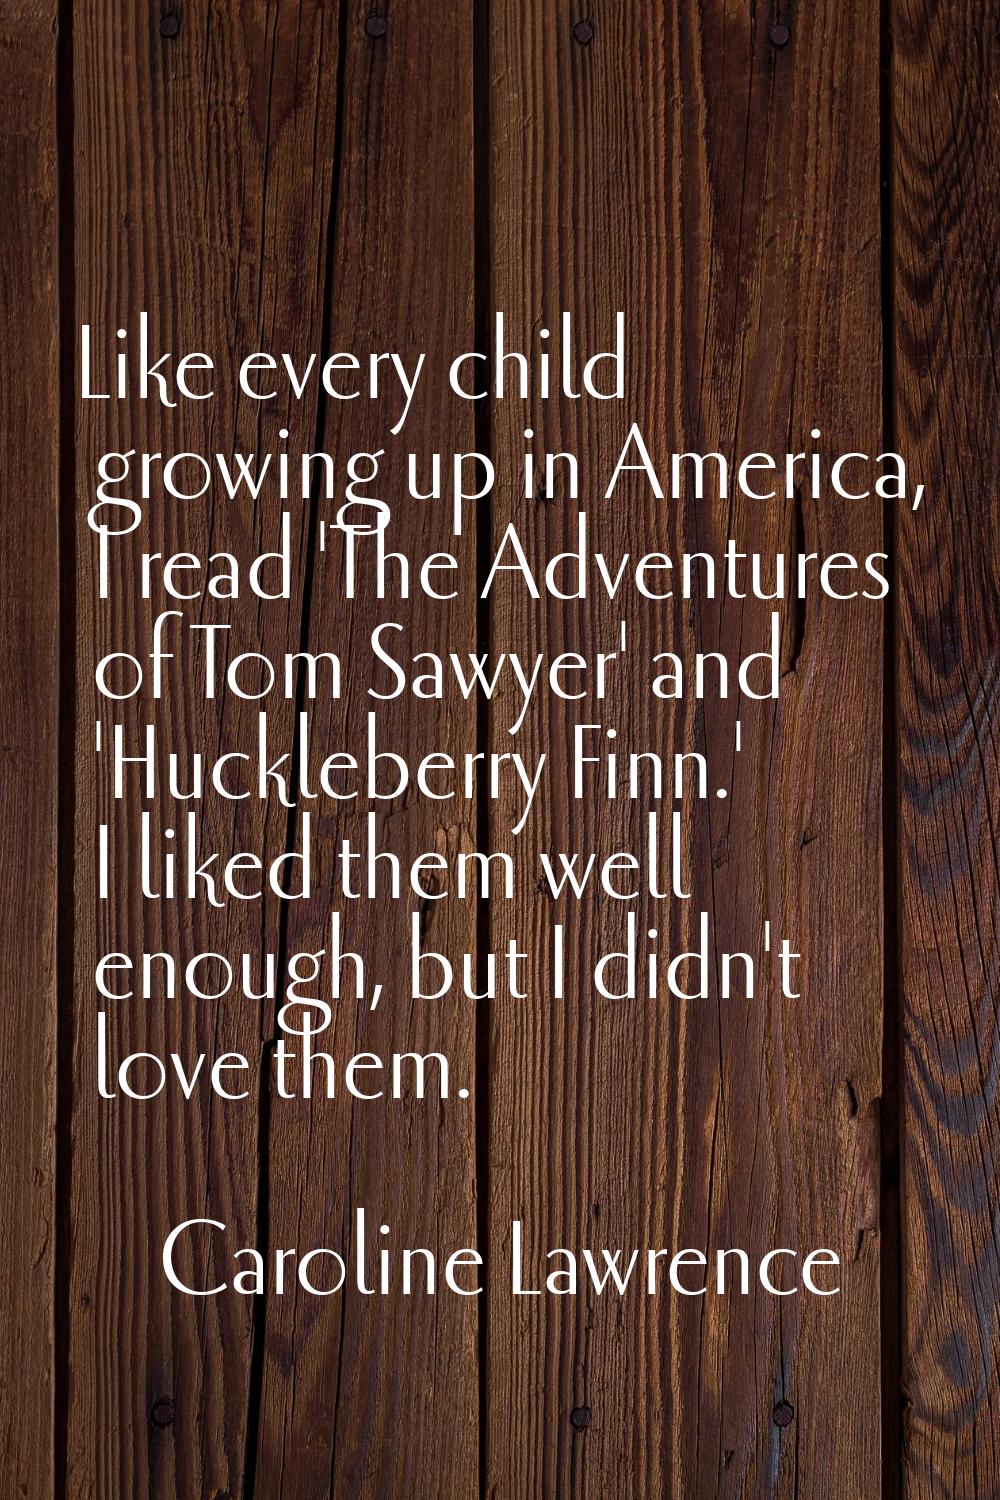 Like every child growing up in America, I read 'The Adventures of Tom Sawyer' and 'Huckleberry Finn